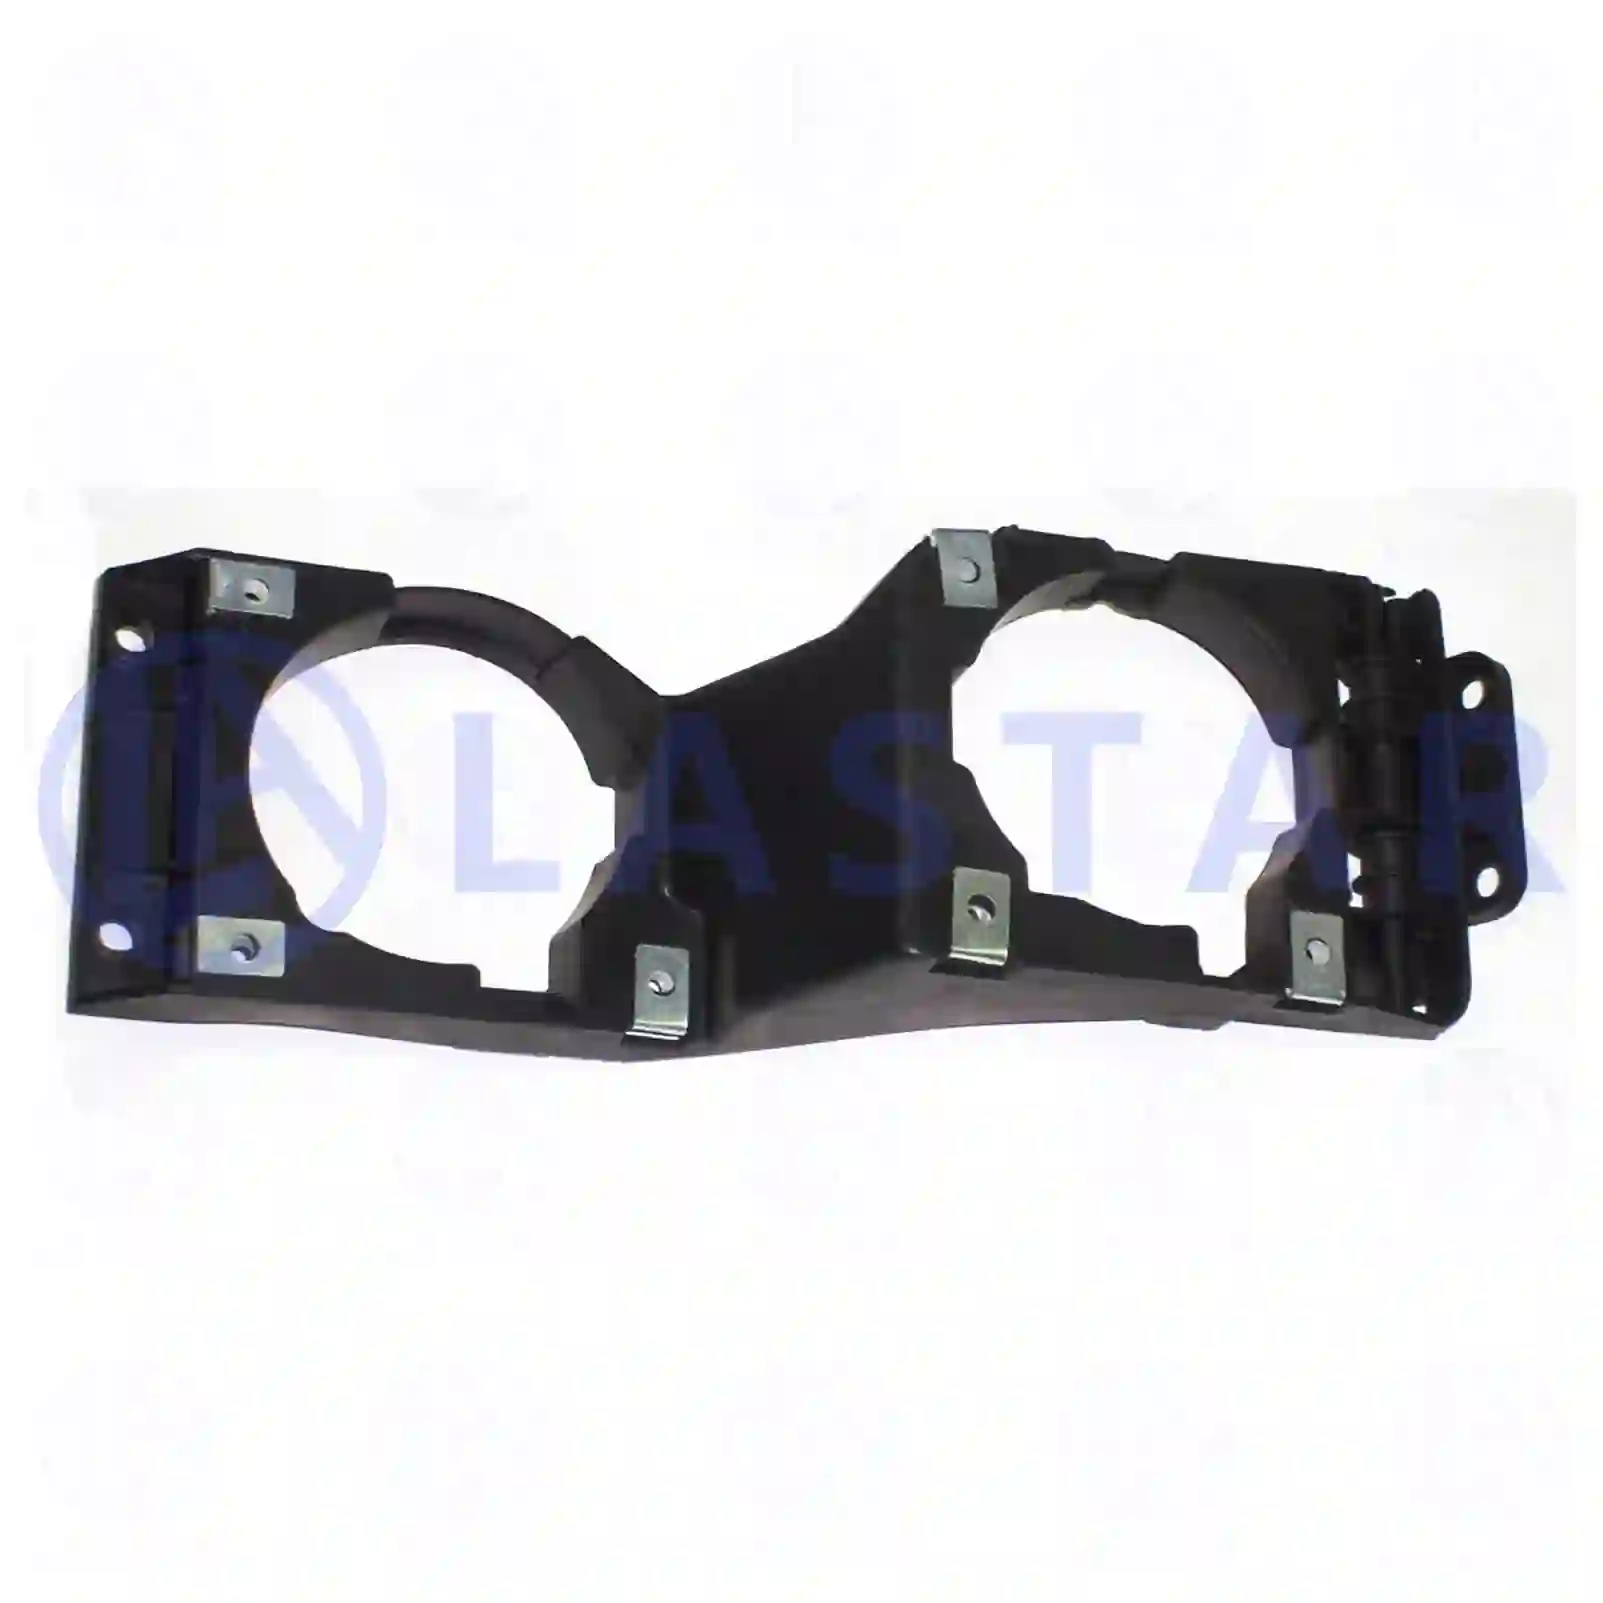 Auxiliary lamp bracket, right, 77712367, 1492258, 1523882, 1786693, 1786695, 523882, ZG20267-0008 ||  77712367 Lastar Spare Part | Truck Spare Parts, Auotomotive Spare Parts Auxiliary lamp bracket, right, 77712367, 1492258, 1523882, 1786693, 1786695, 523882, ZG20267-0008 ||  77712367 Lastar Spare Part | Truck Spare Parts, Auotomotive Spare Parts